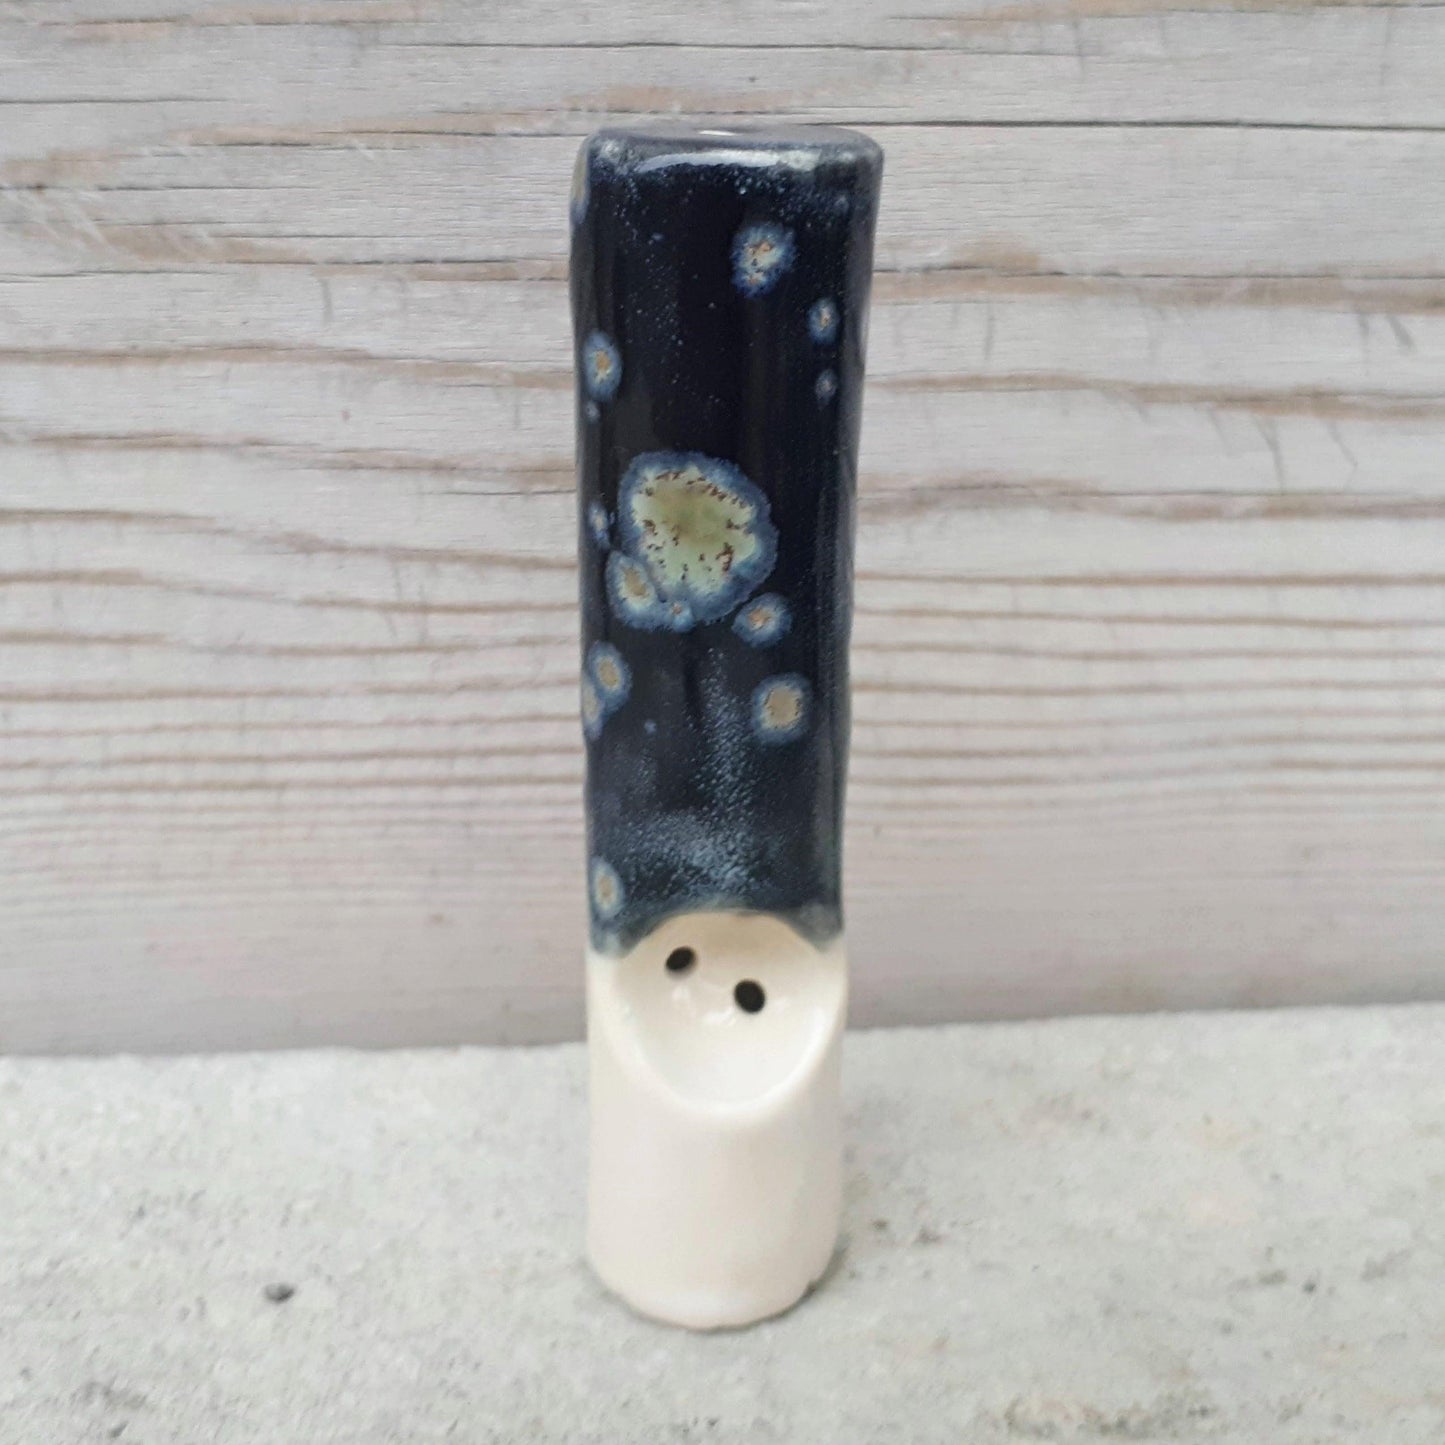 Starry Night Original Cannabis Pipe standing on end